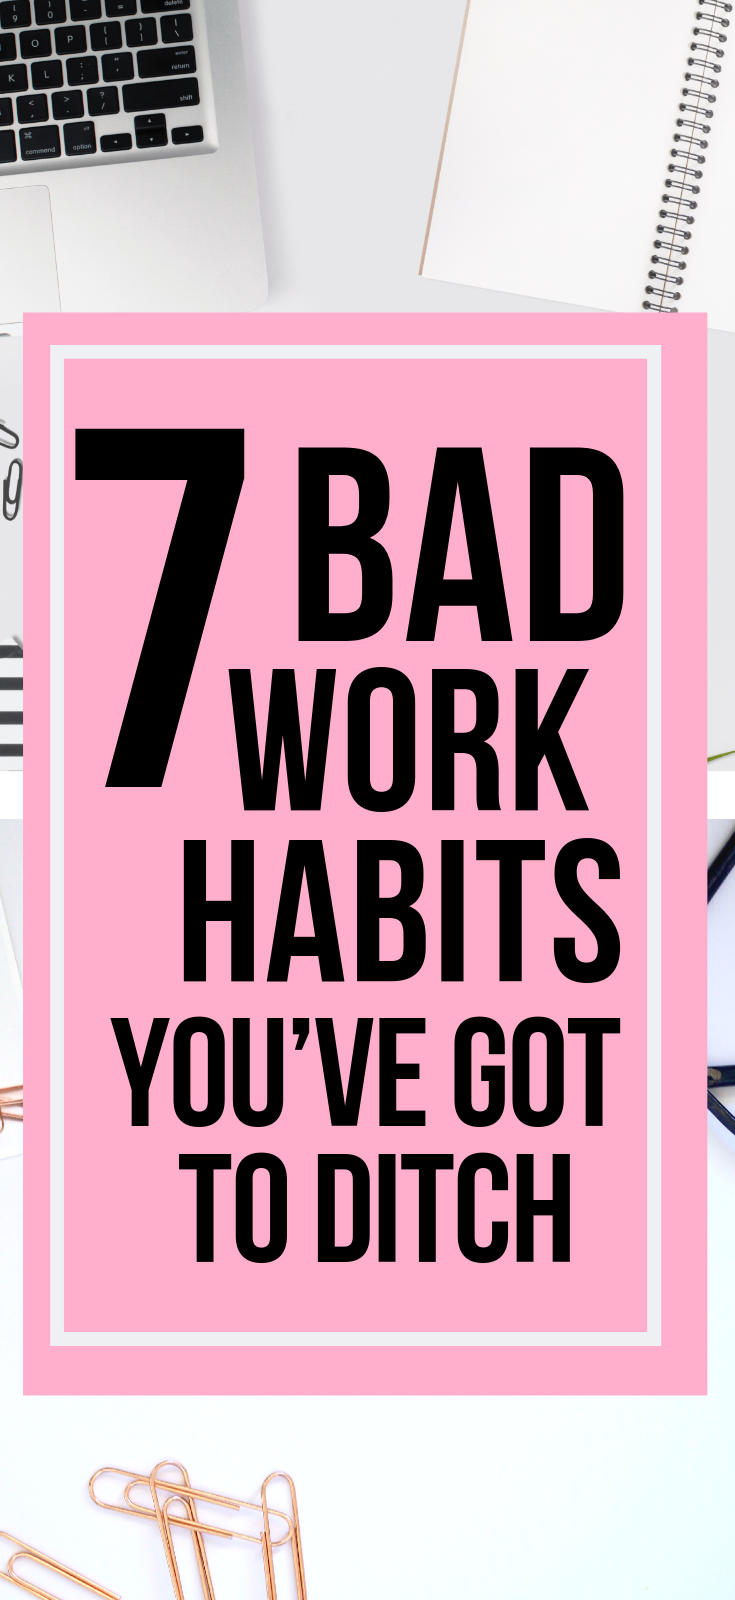 7 bad work habits to ditch